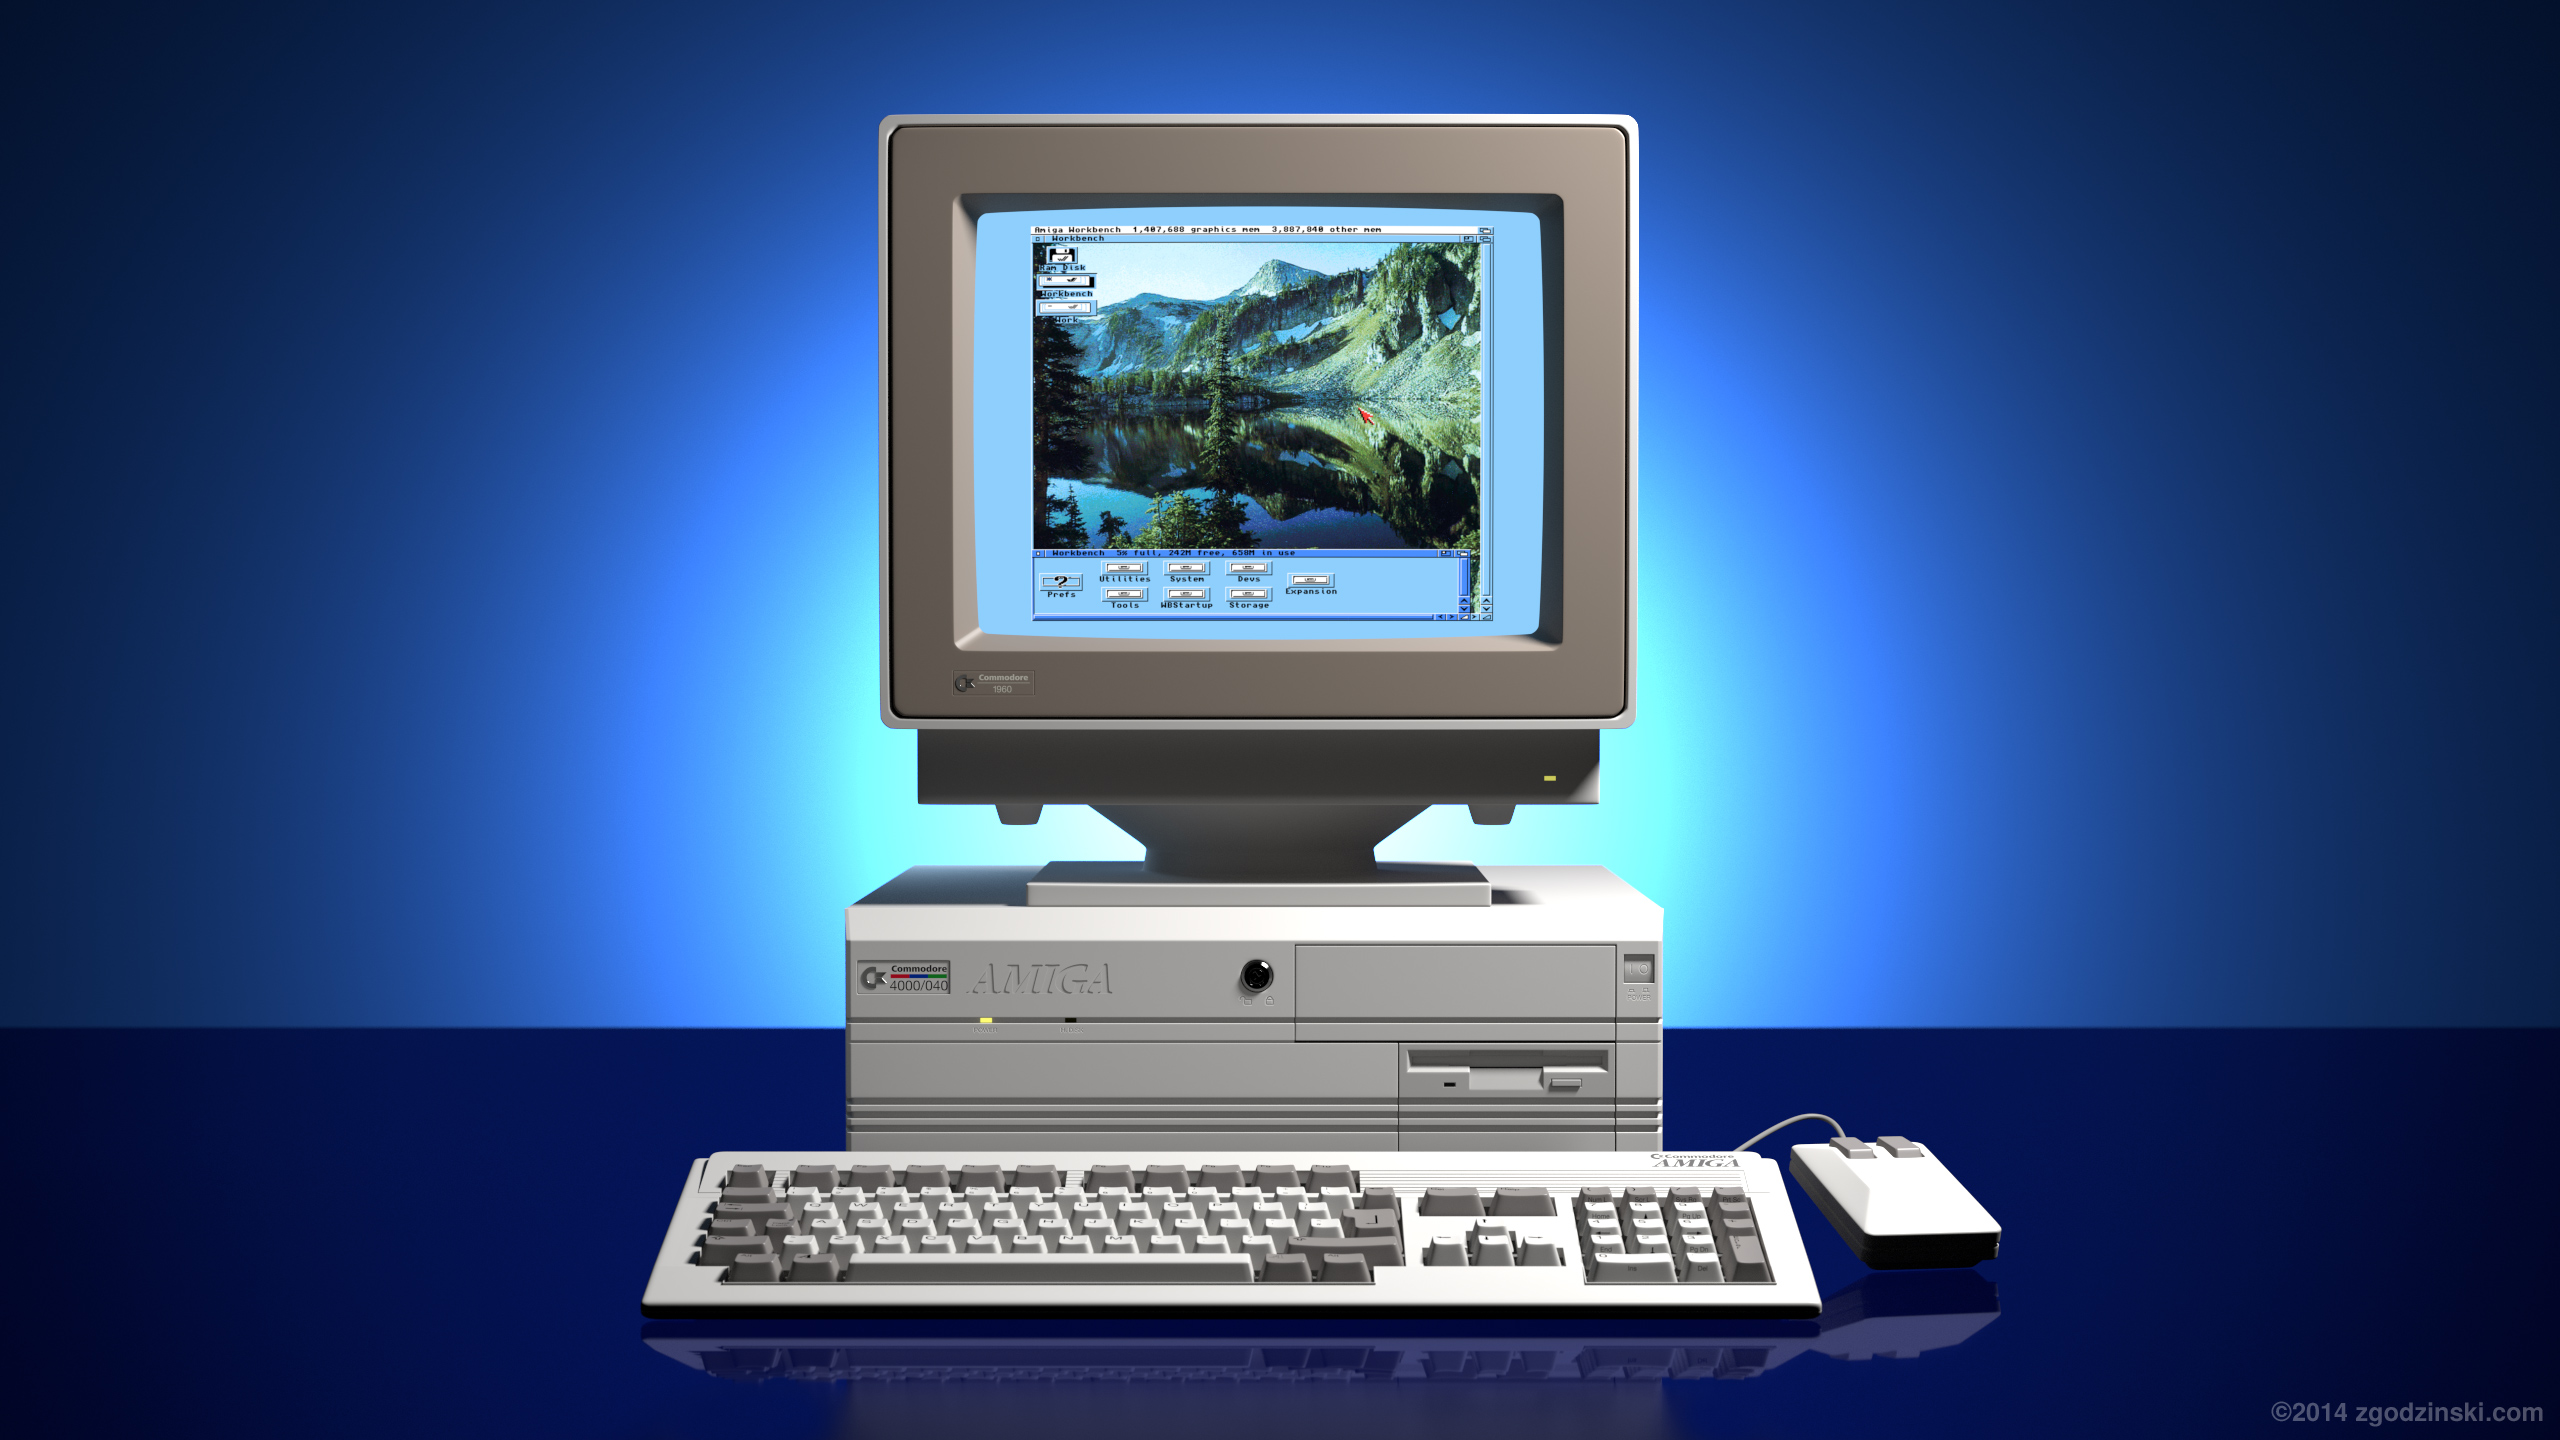 Commodore Amiga Backgrounds, Compatible - PC, Mobile, Gadgets| 2560x1440 px